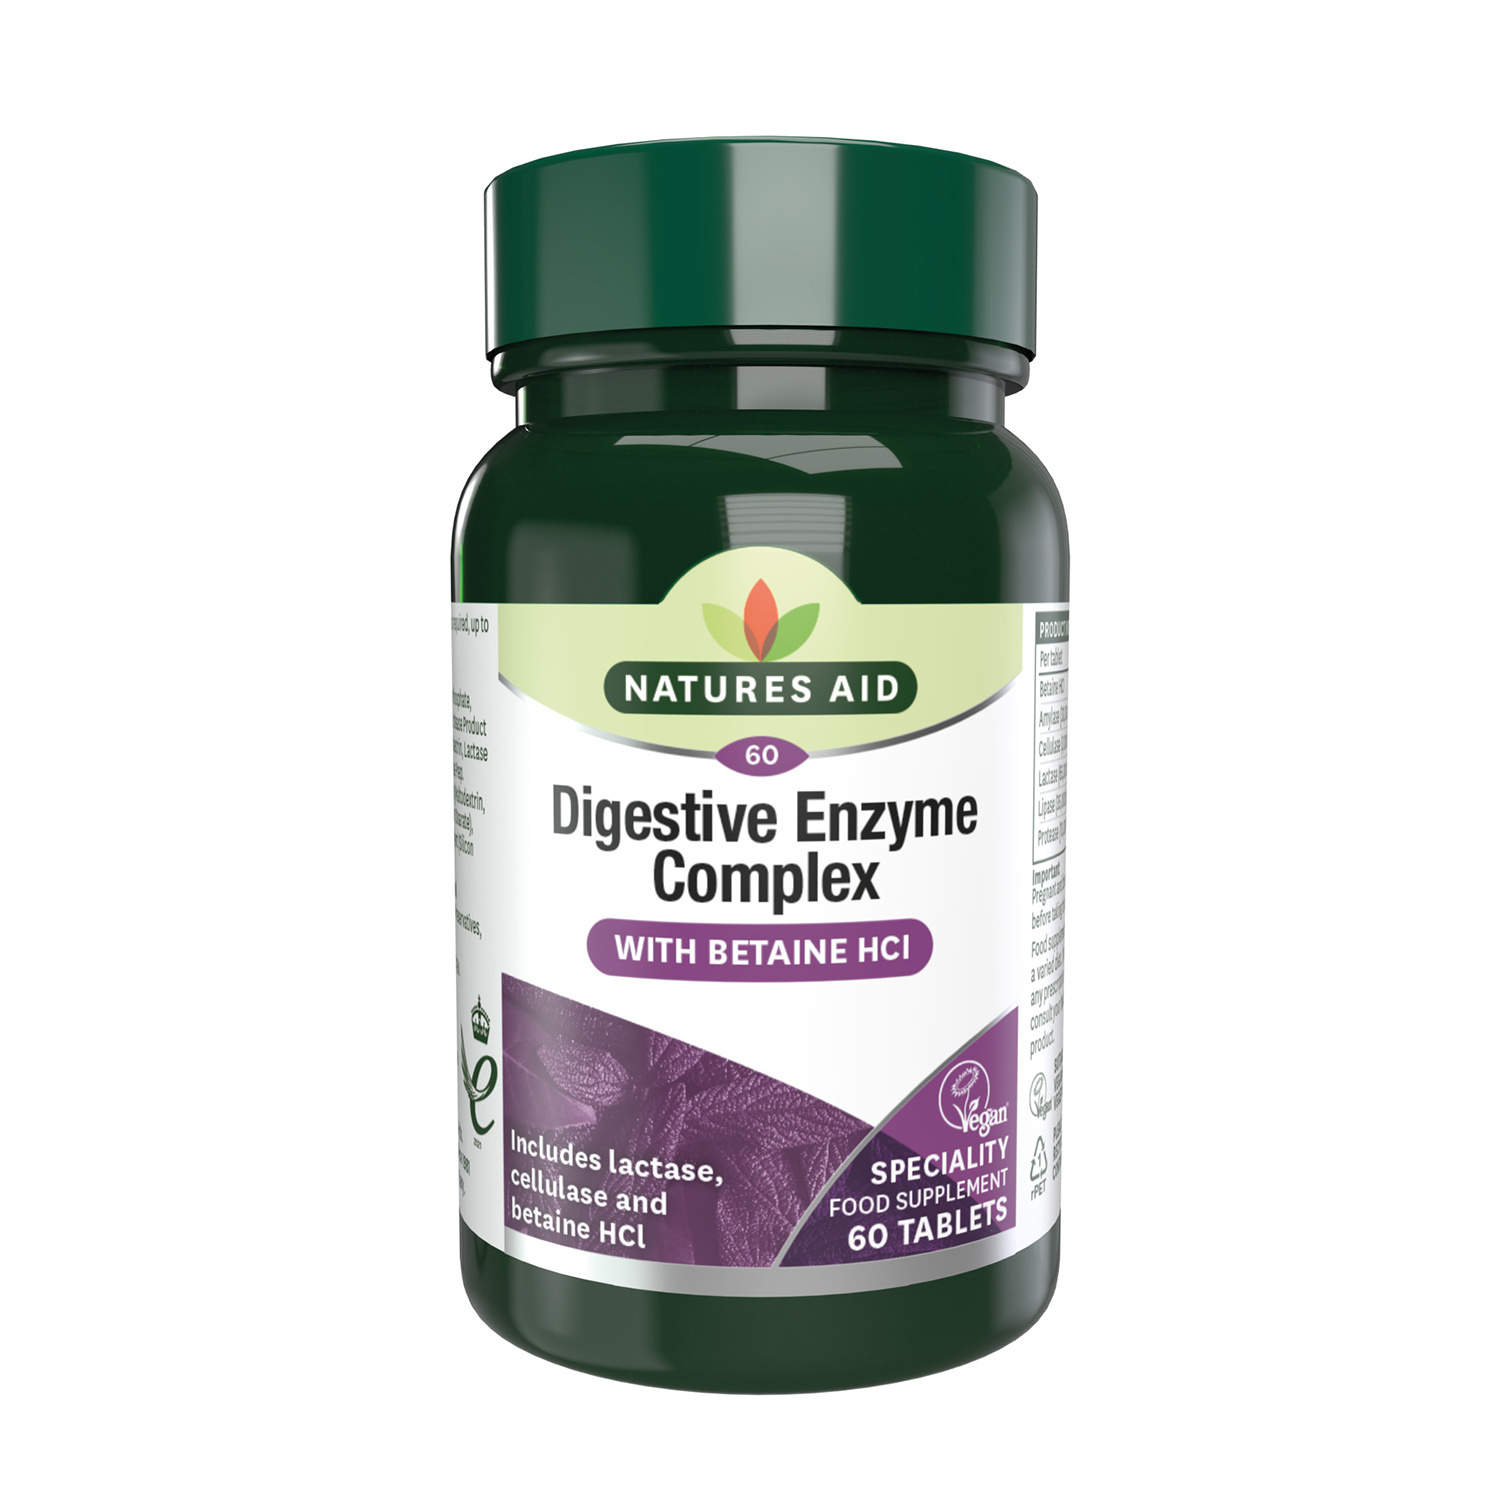 Natures Aid Digestive Enzyme Complex (with Betaine HCI)